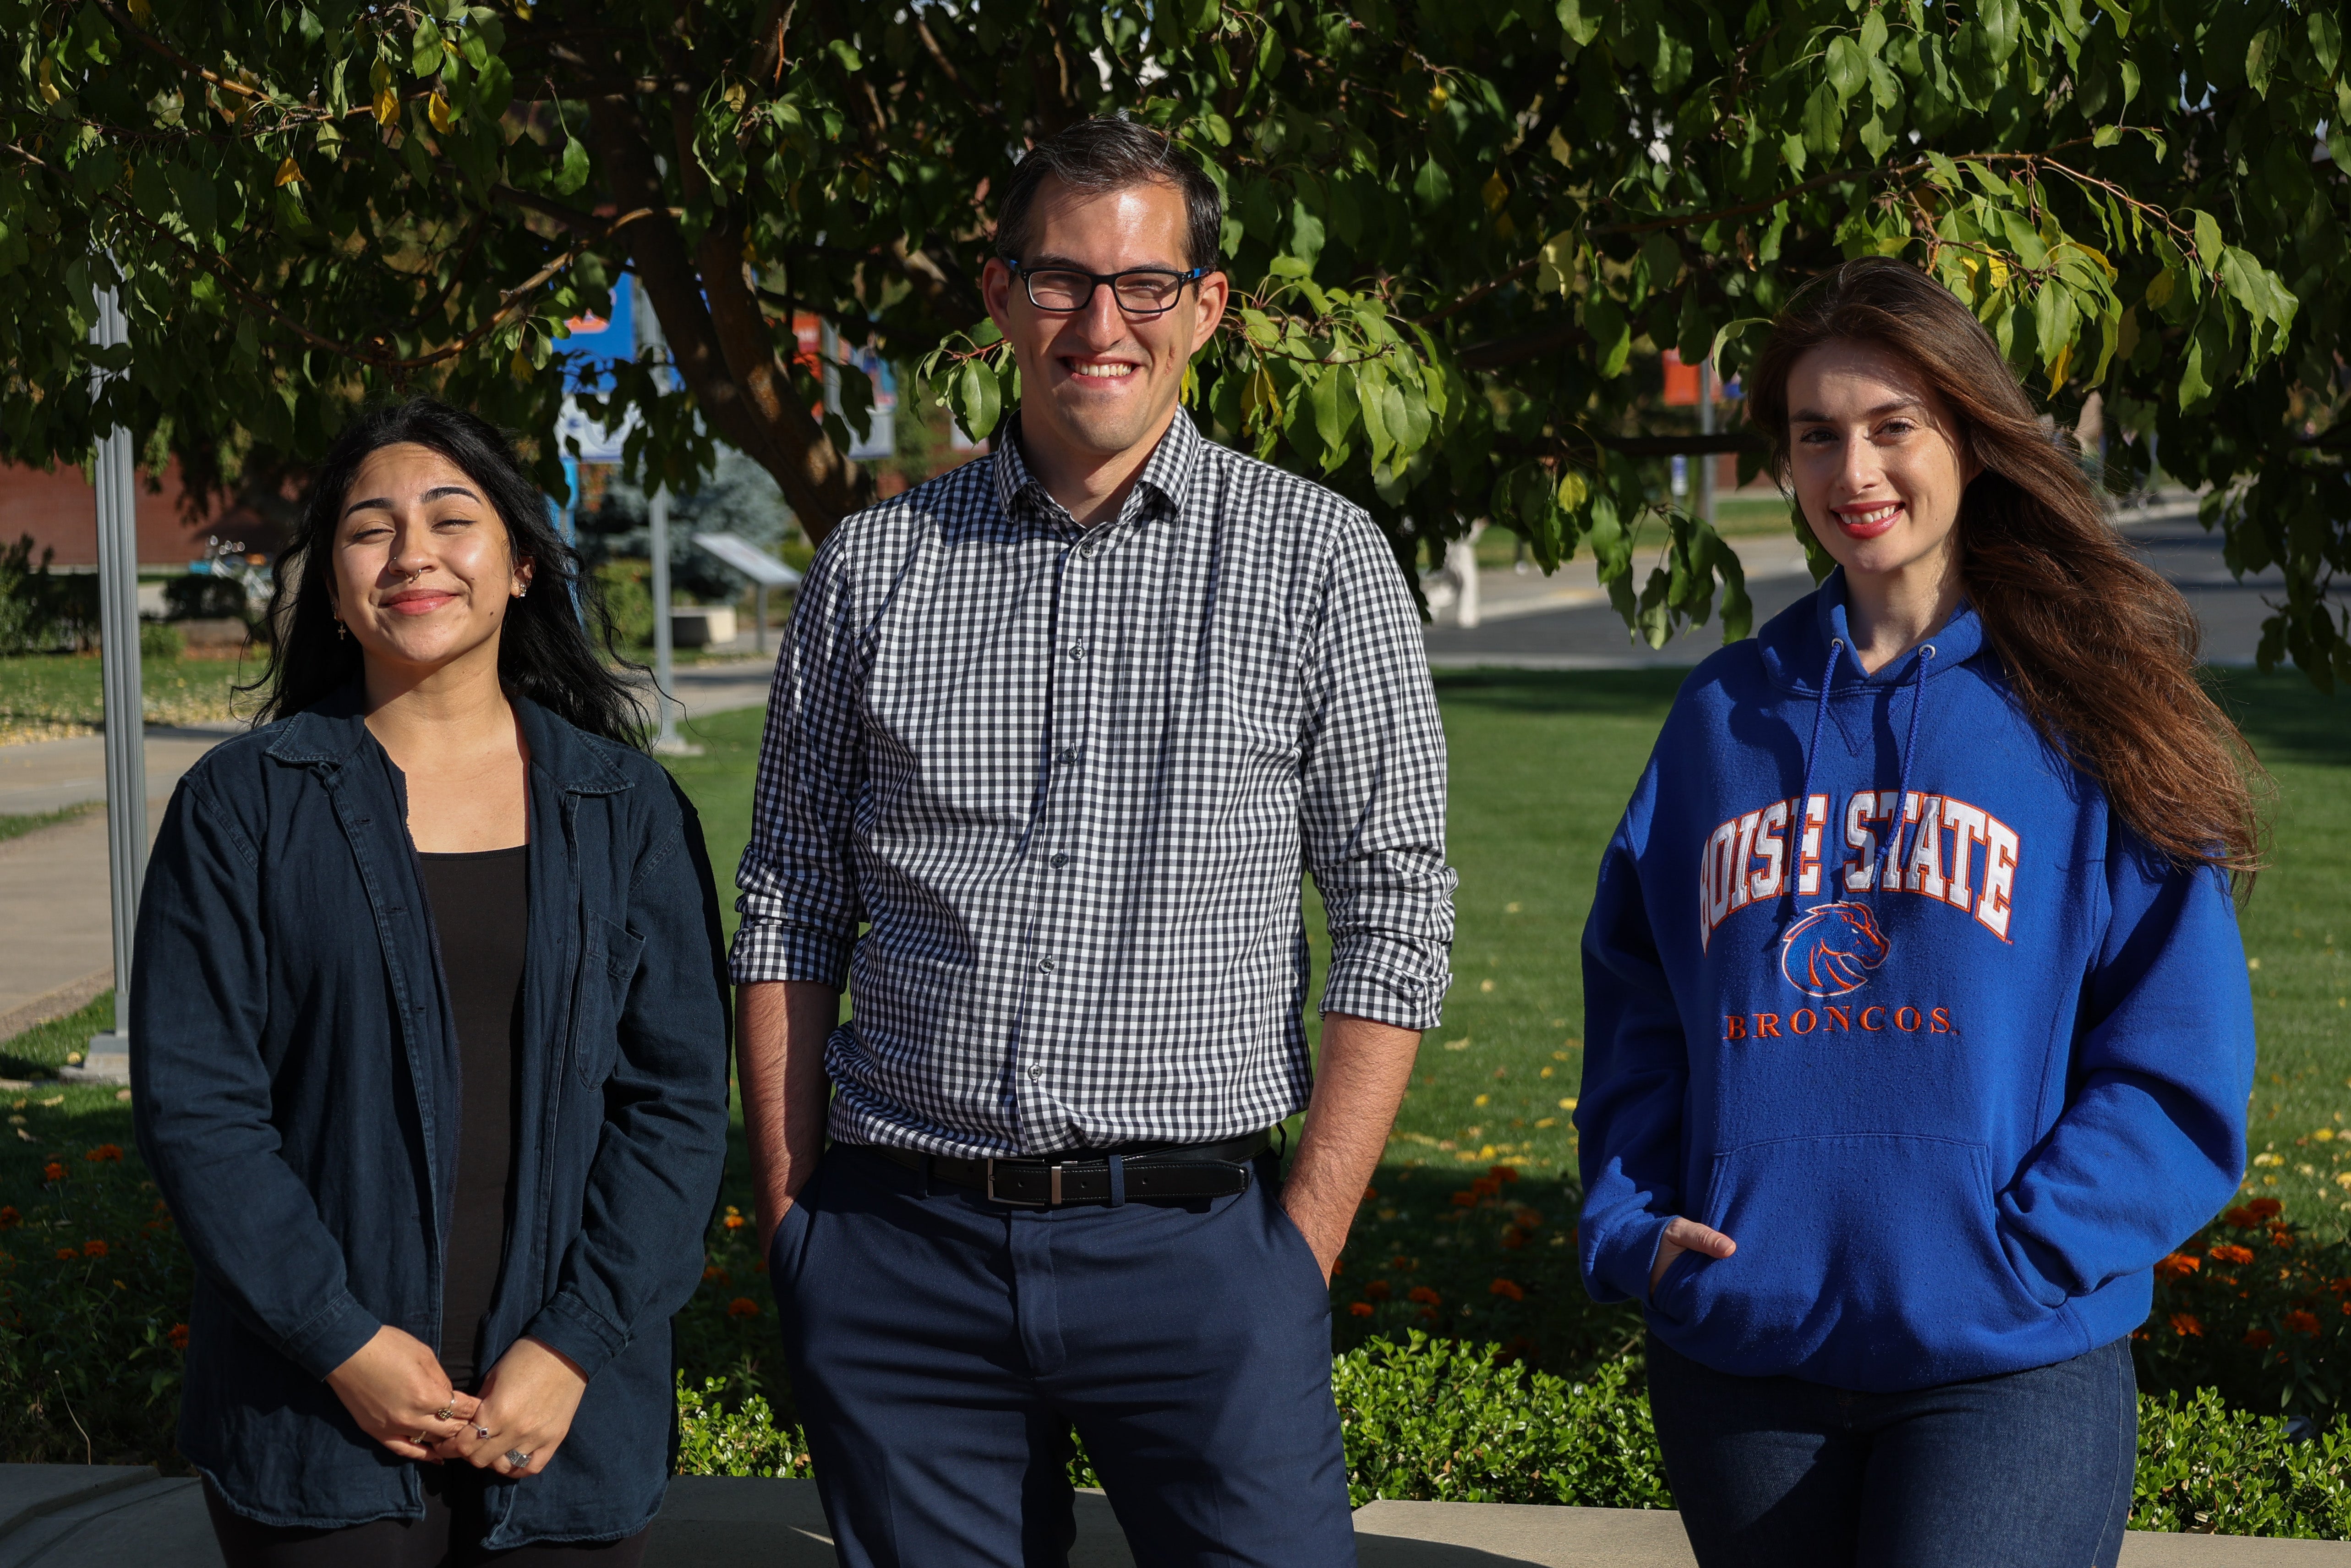 (Left to right) Boise State student Stacey Pedraza, Nico Diaz, senior student initiatives coordinator with the Institute for Inclusive and Transformative Scholarship, and Boise State student Melissa Ogle, are part of the 124 undergraduate researchers and 75 campus representatives from across the nation who will comprise the inaugural class of the Students Transforming Through Research Advocacy Program. The six-month program aims to develop the selectees' research communication and advocacy skills.